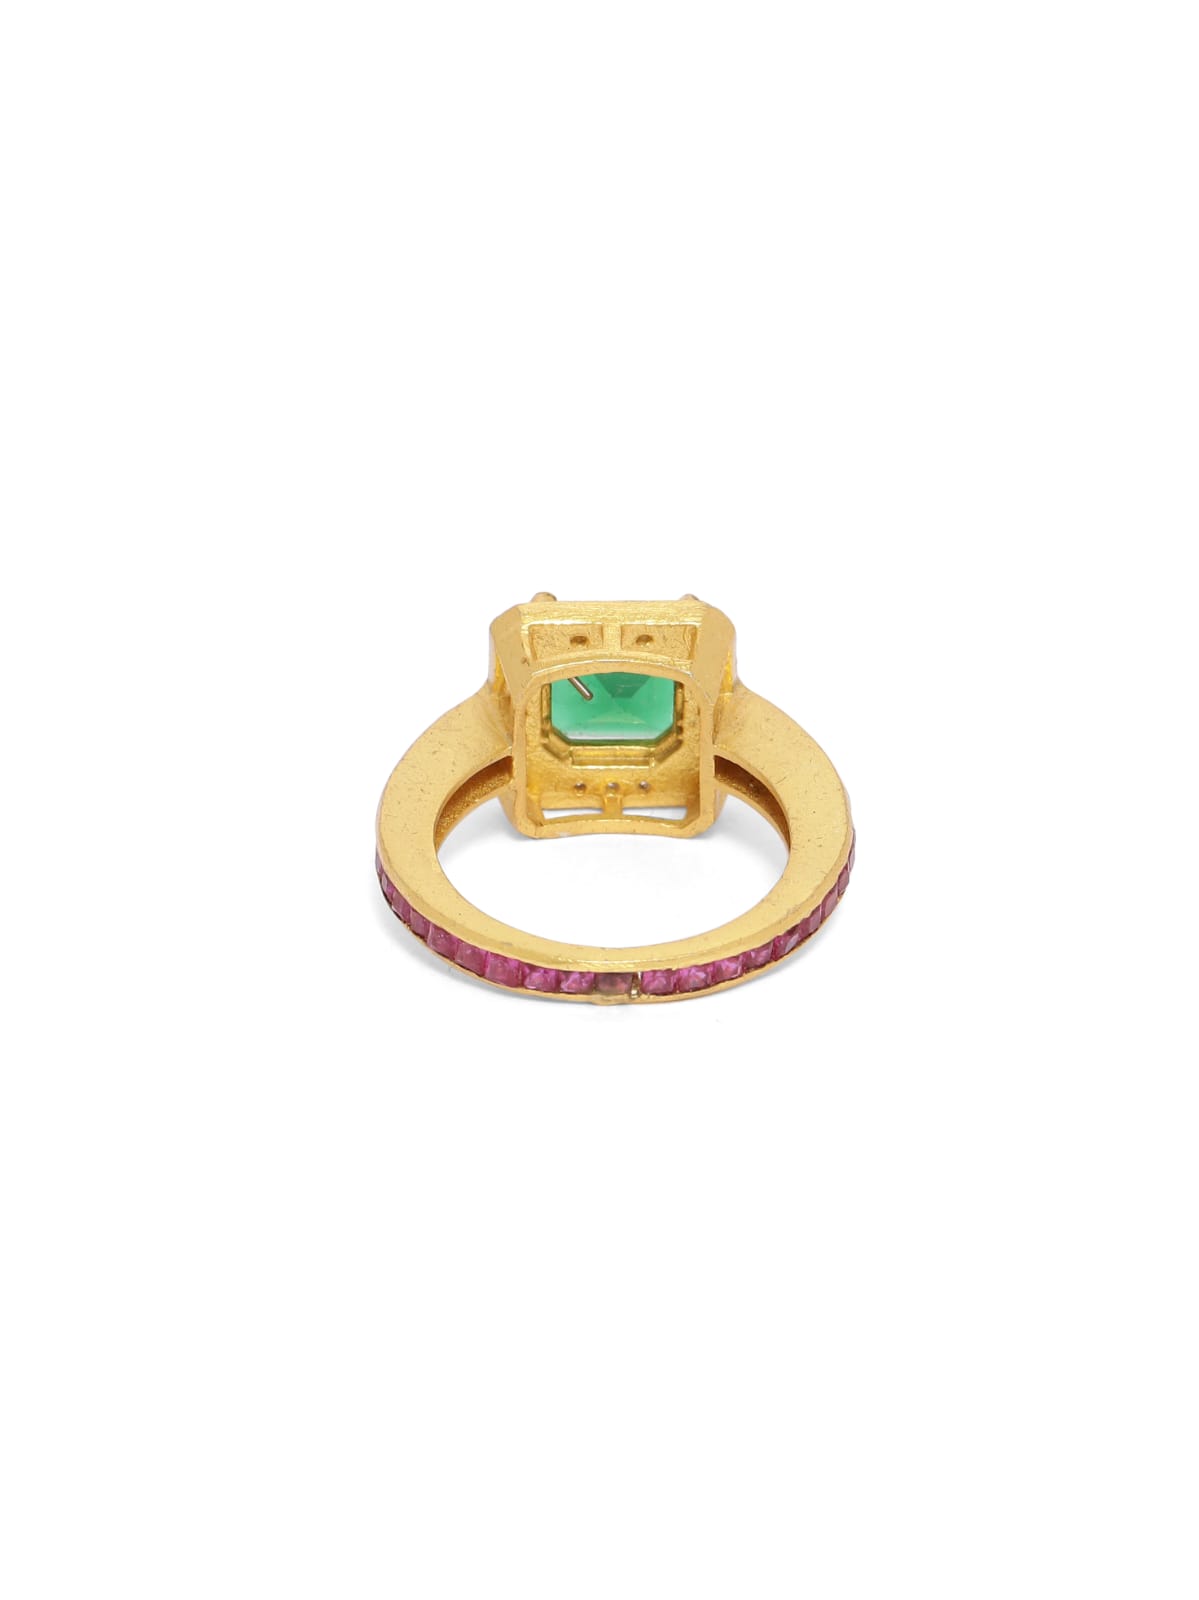 Art deco style ring with red, green and white Zircons in sterling Silver with micron Gold plating (Made to size).